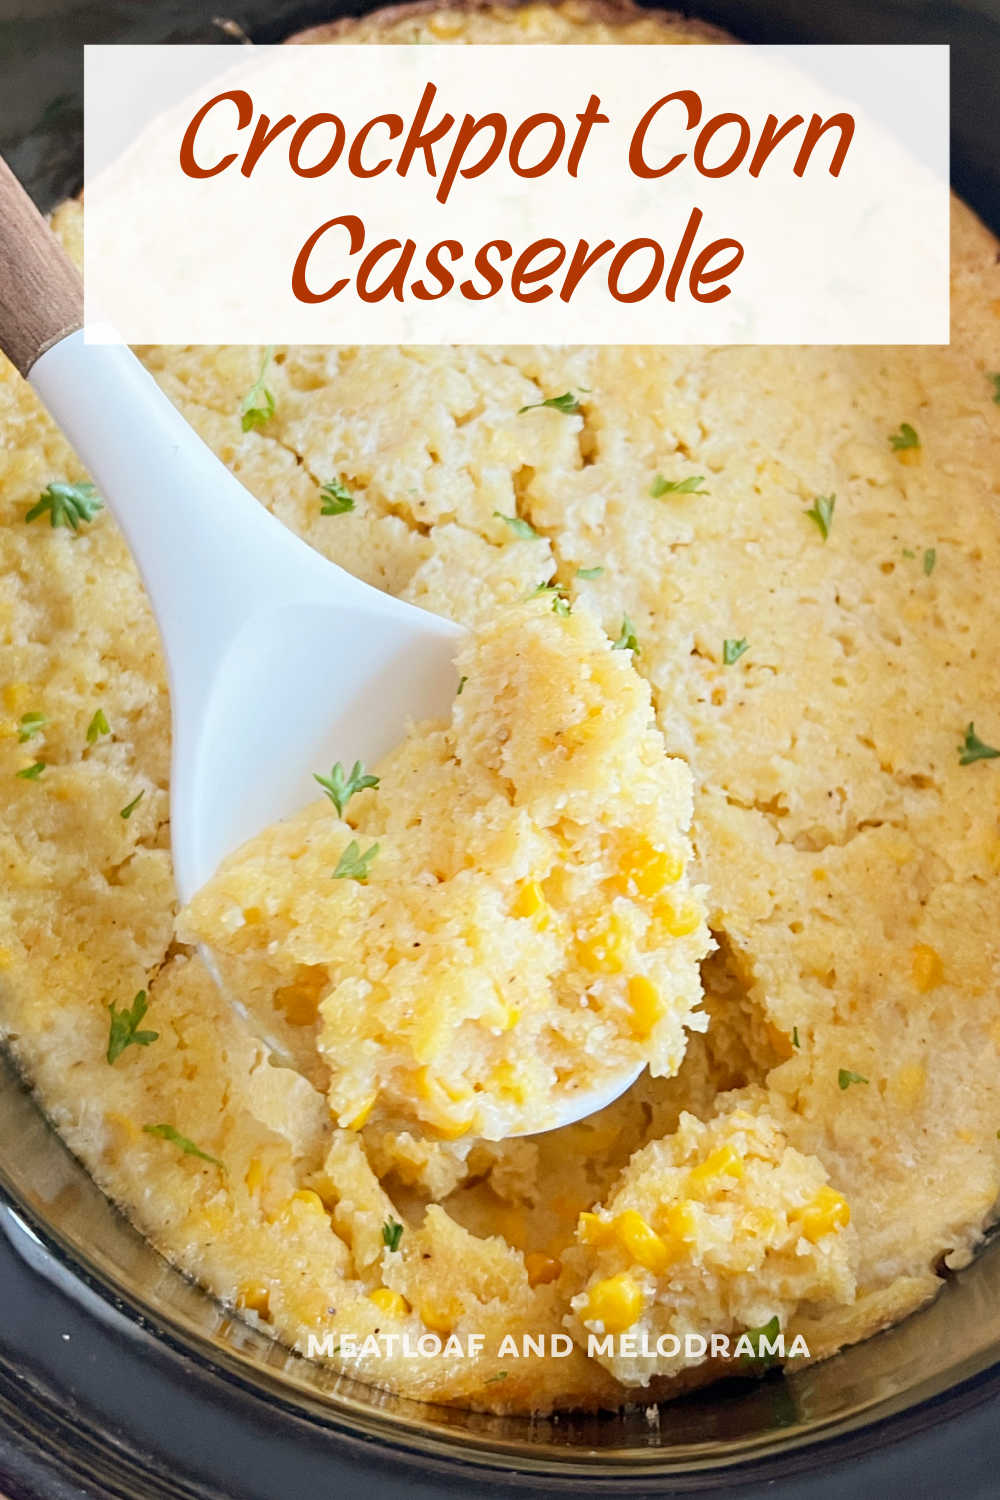 Crock Pot Corn Casserole is an easy slow cooker recipe for corn pudding made with Jiffy Mix. An easy side dish for the holiday season and a great way to save oven space! via @meamel